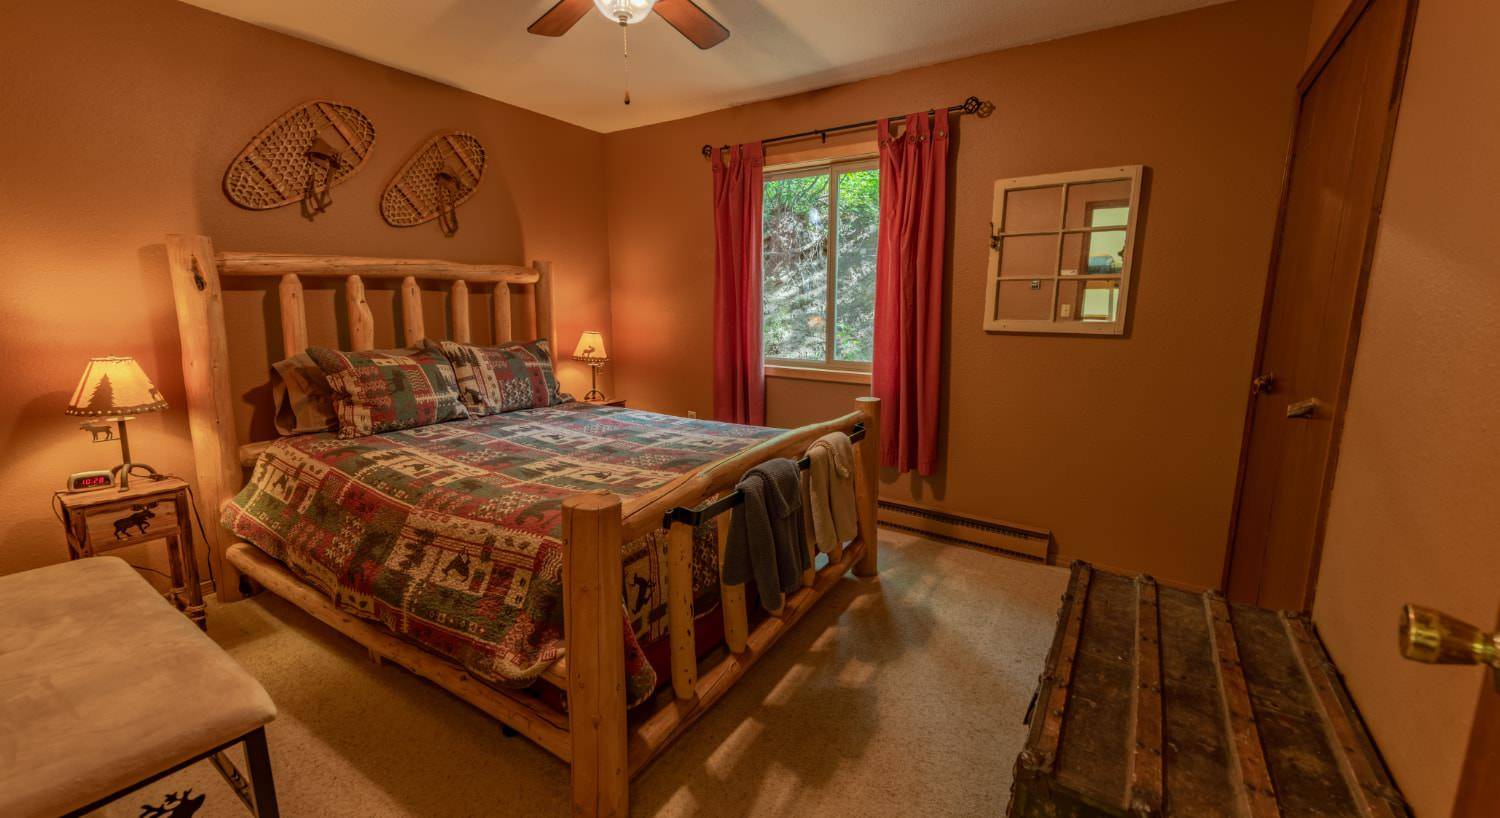 Bedroom with brown walls, carpeting, wooden log bed, homemade quilt, and large trunk